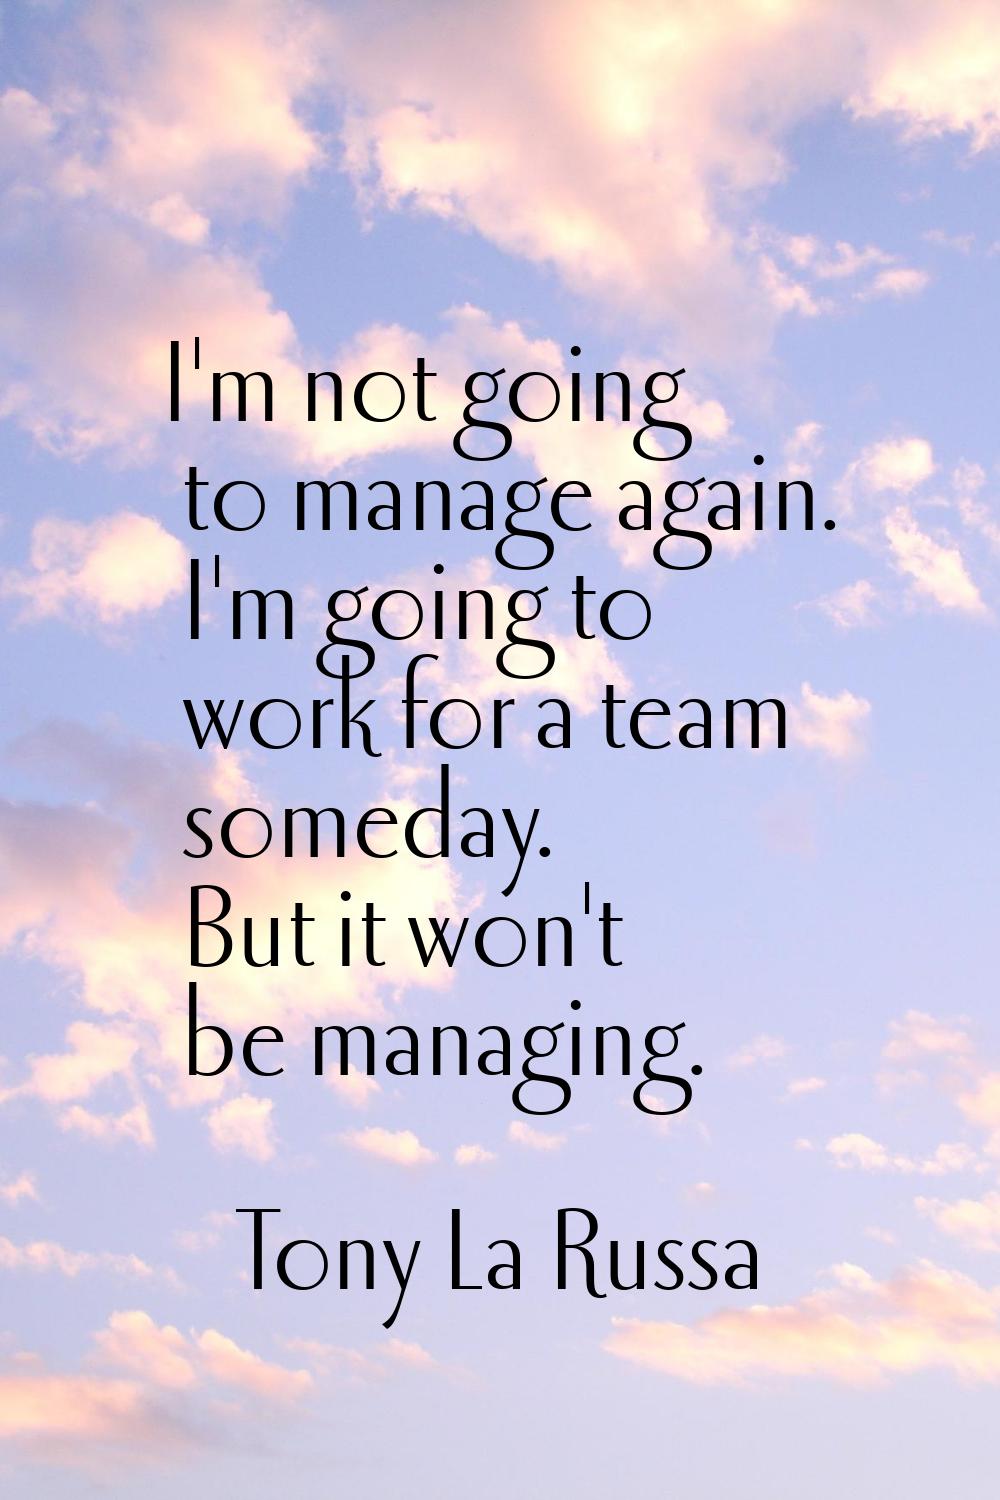 I'm not going to manage again. I'm going to work for a team someday. But it won't be managing.